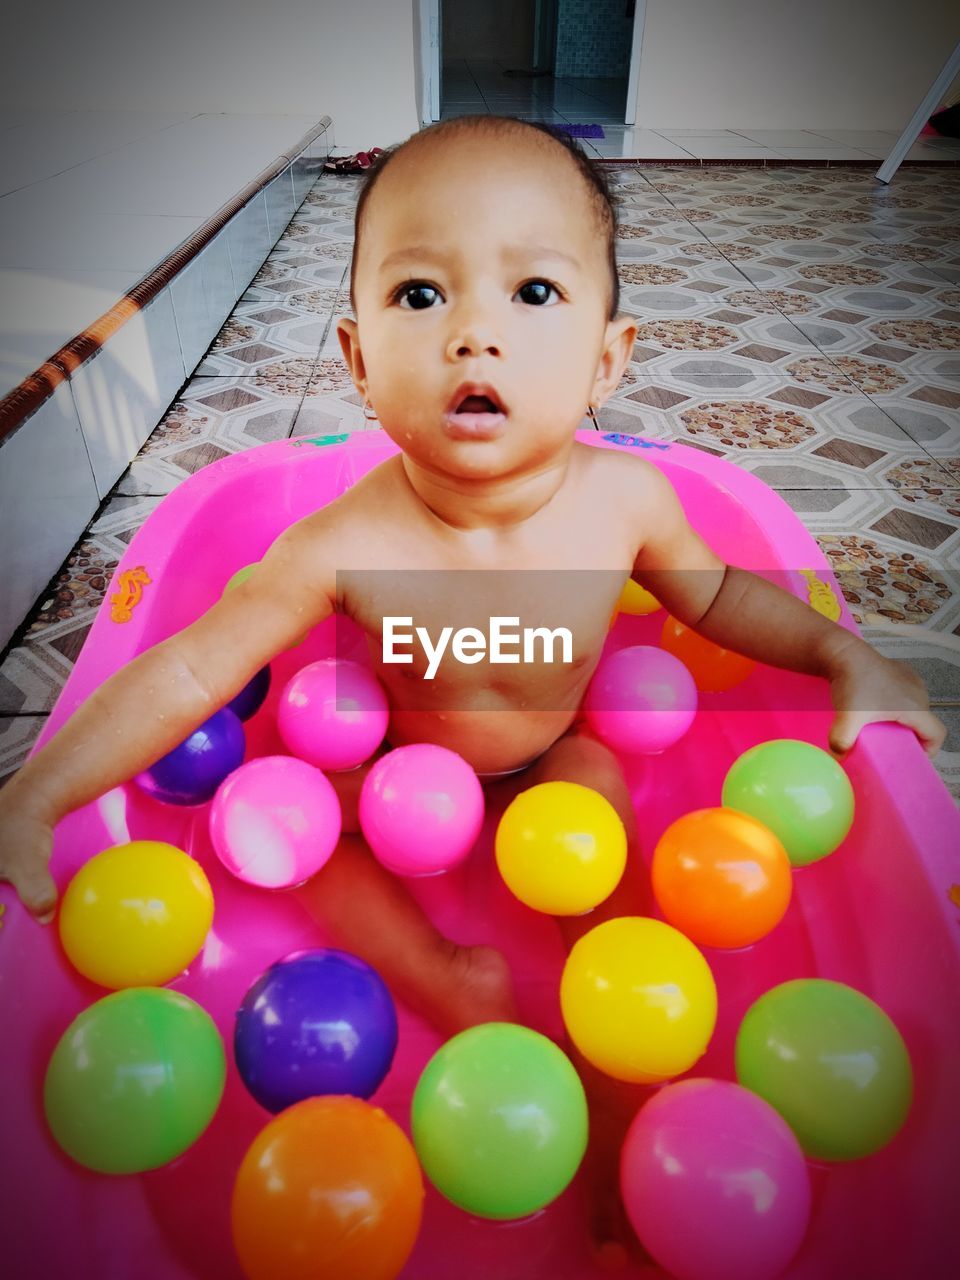 child, one person, childhood, baby, portrait, multi colored, indoors, pink, looking at camera, toy, innocence, fun, cute, toddler, lifestyles, front view, happiness, emotion, smiling, high angle view, leisure activity, sitting, babyhood, bathtub, enjoyment, domestic room, relaxation